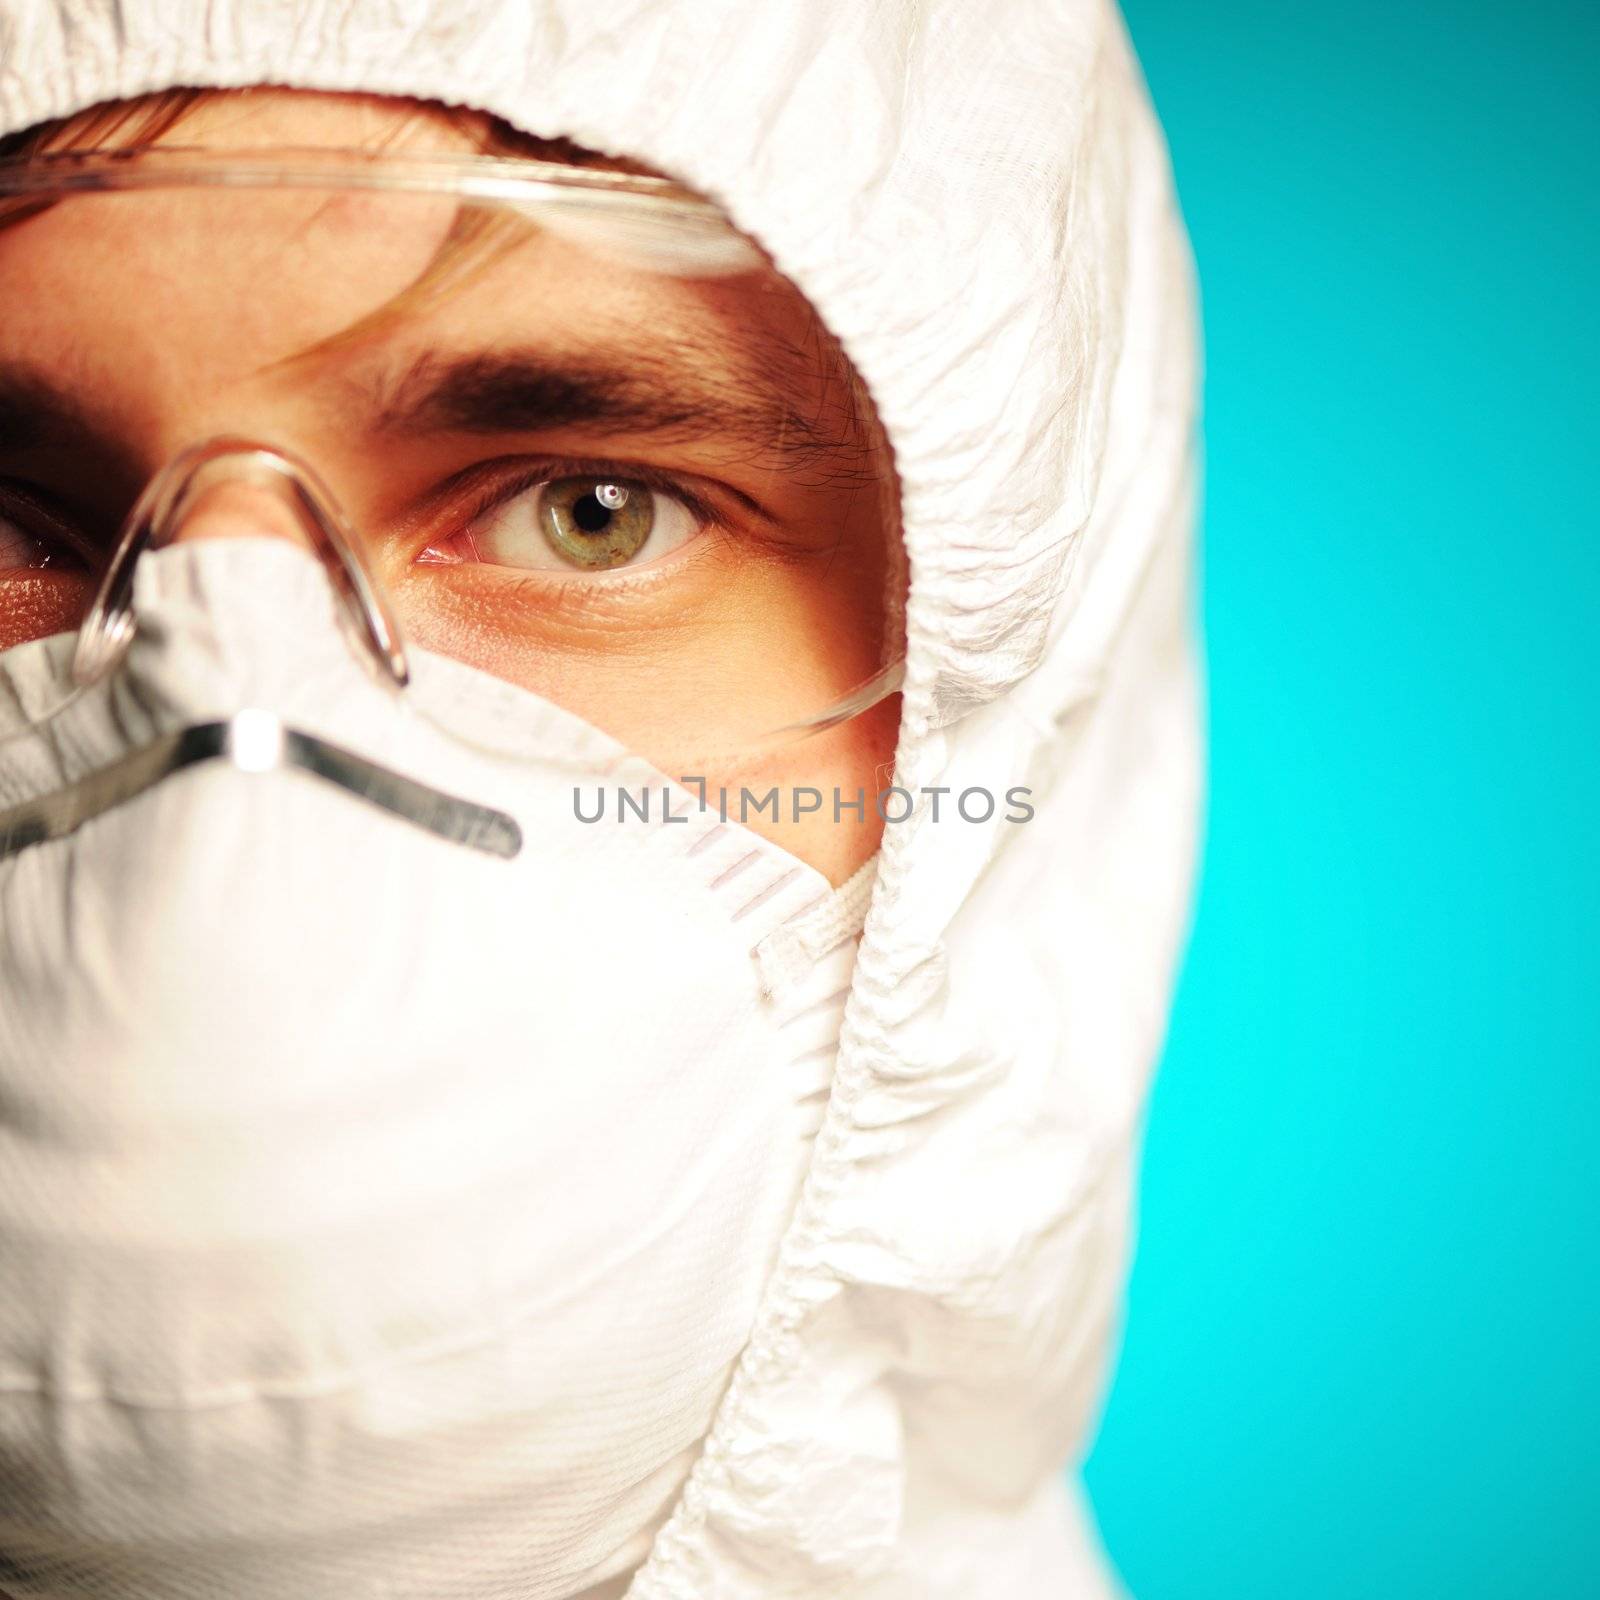 Scientist in protective wear, glasses and respirator 